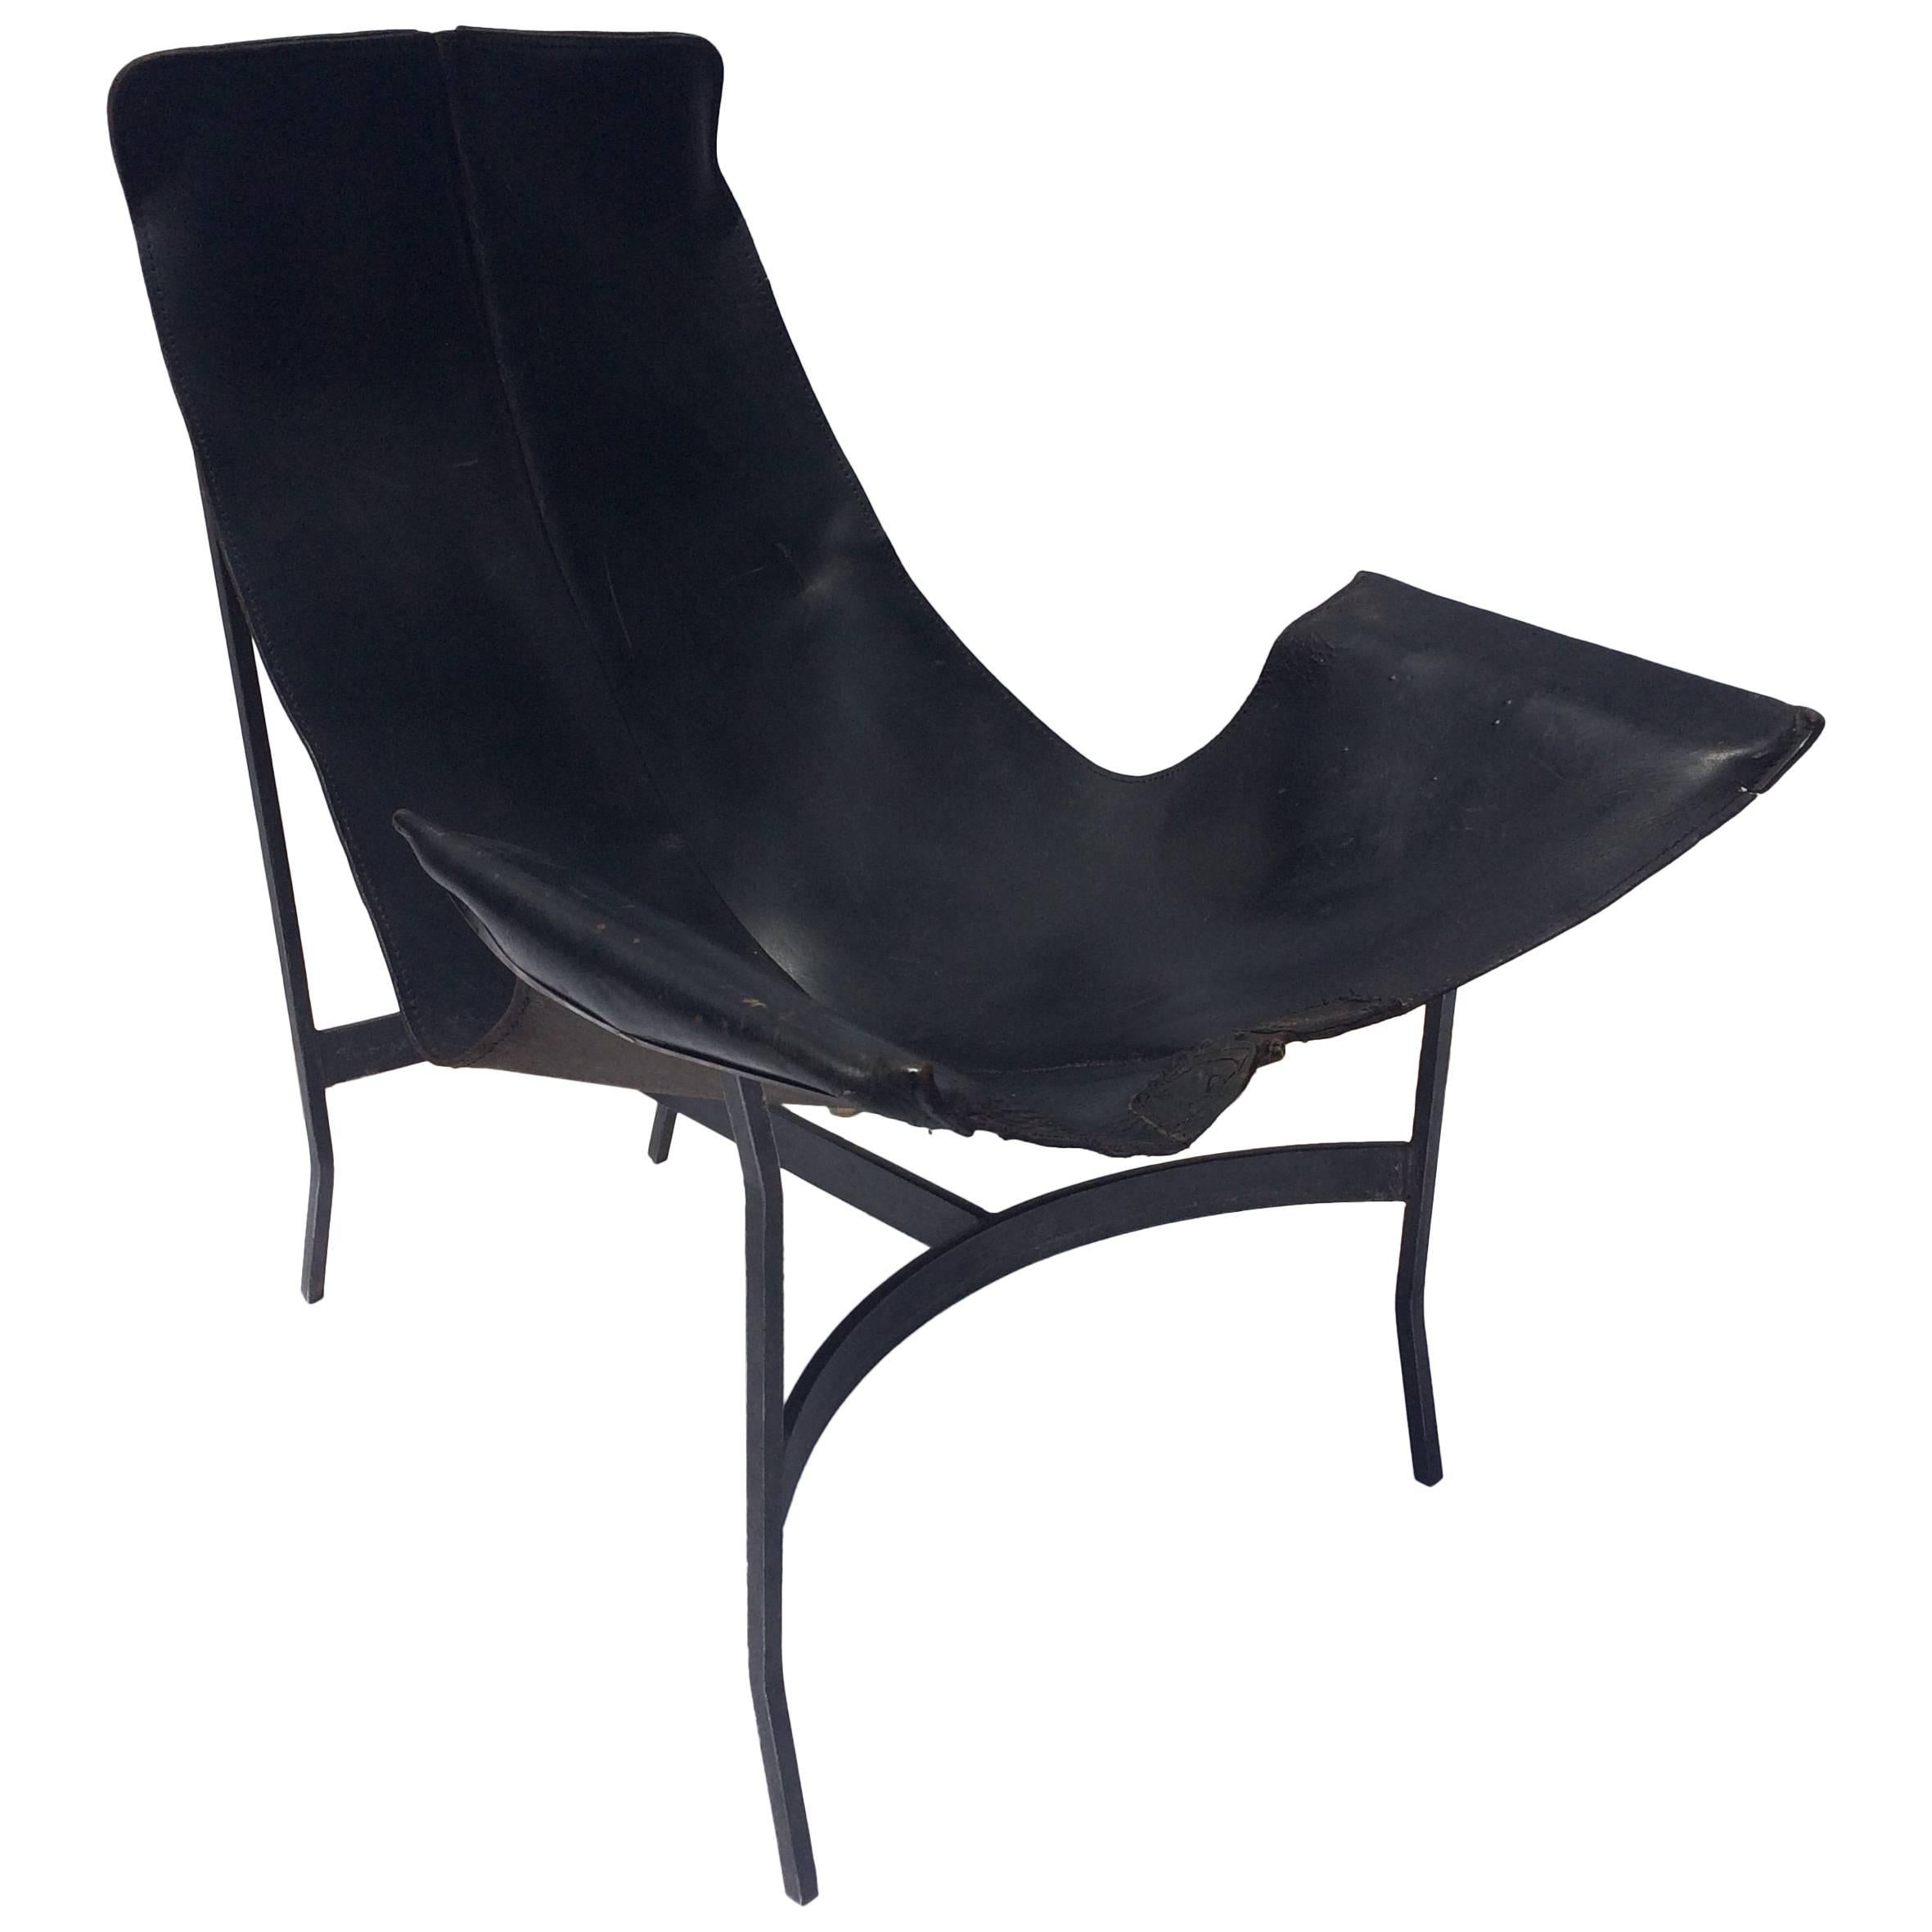 Leather Sling Chair by William Katavolos for Leathercrafter